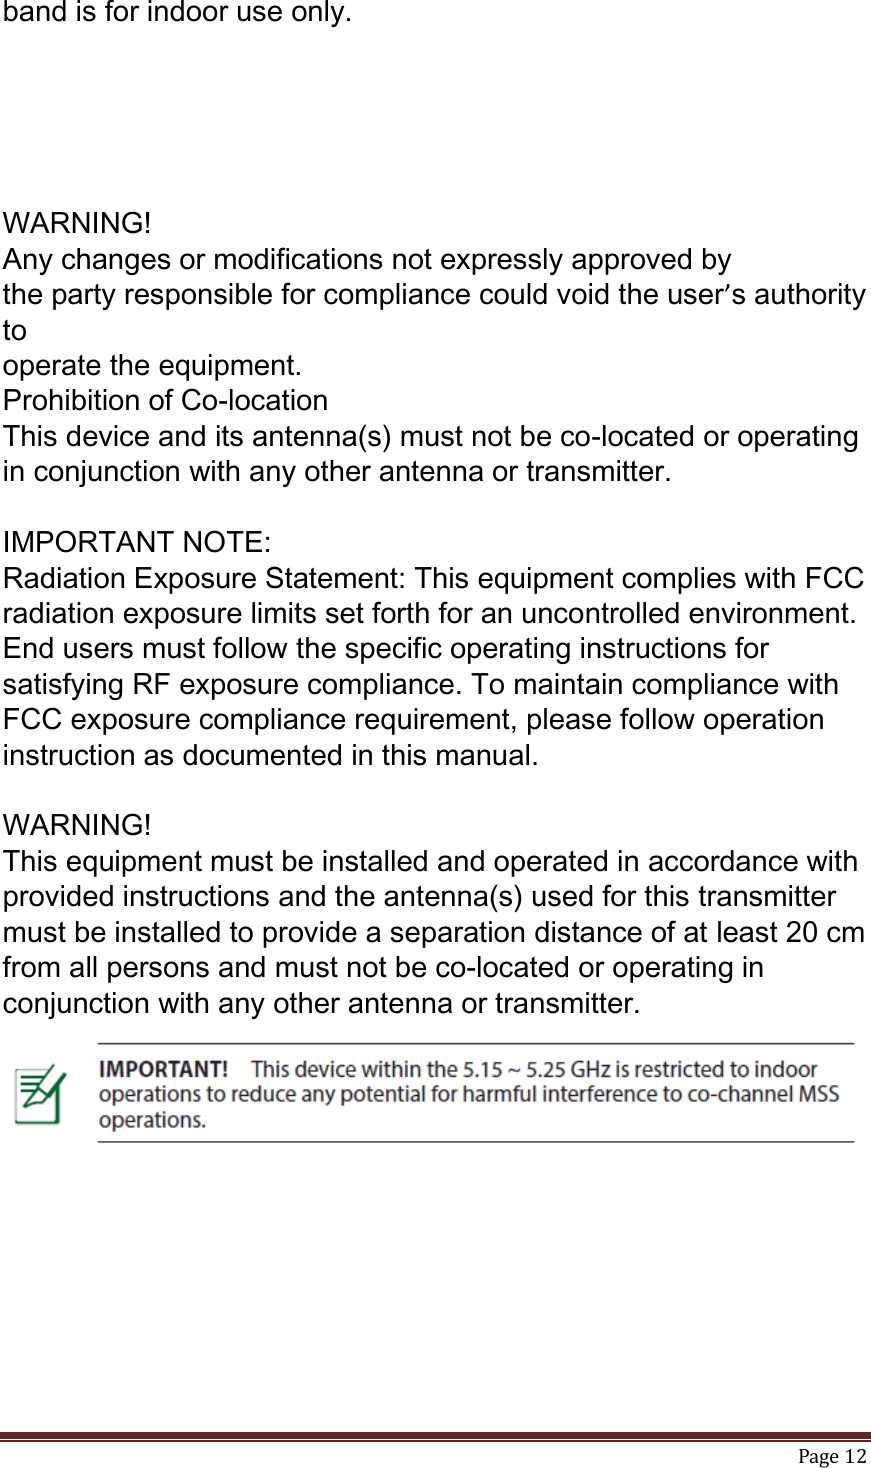   Page 12  band is for indoor use only.      WARNING!   Any changes or modifications not expressly approved by the party responsible for compliance could void the user’s authority to operate the equipment. Prohibition of Co-location This device and its antenna(s) must not be co-located or operating in conjunction with any other antenna or transmitter.  IMPORTANT NOTE: Radiation Exposure Statement: This equipment complies with FCC radiation exposure limits set forth for an uncontrolled environment. End users must follow the specific operating instructions for satisfying RF exposure compliance. To maintain compliance with FCC exposure compliance requirement, please follow operation instruction as documented in this manual.  WARNING! This equipment must be installed and operated in accordance with provided instructions and the antenna(s) used for this transmitter must be installed to provide a separation distance of at least 20 cm from all persons and must not be co-located or operating in conjunction with any other antenna or transmitter.  